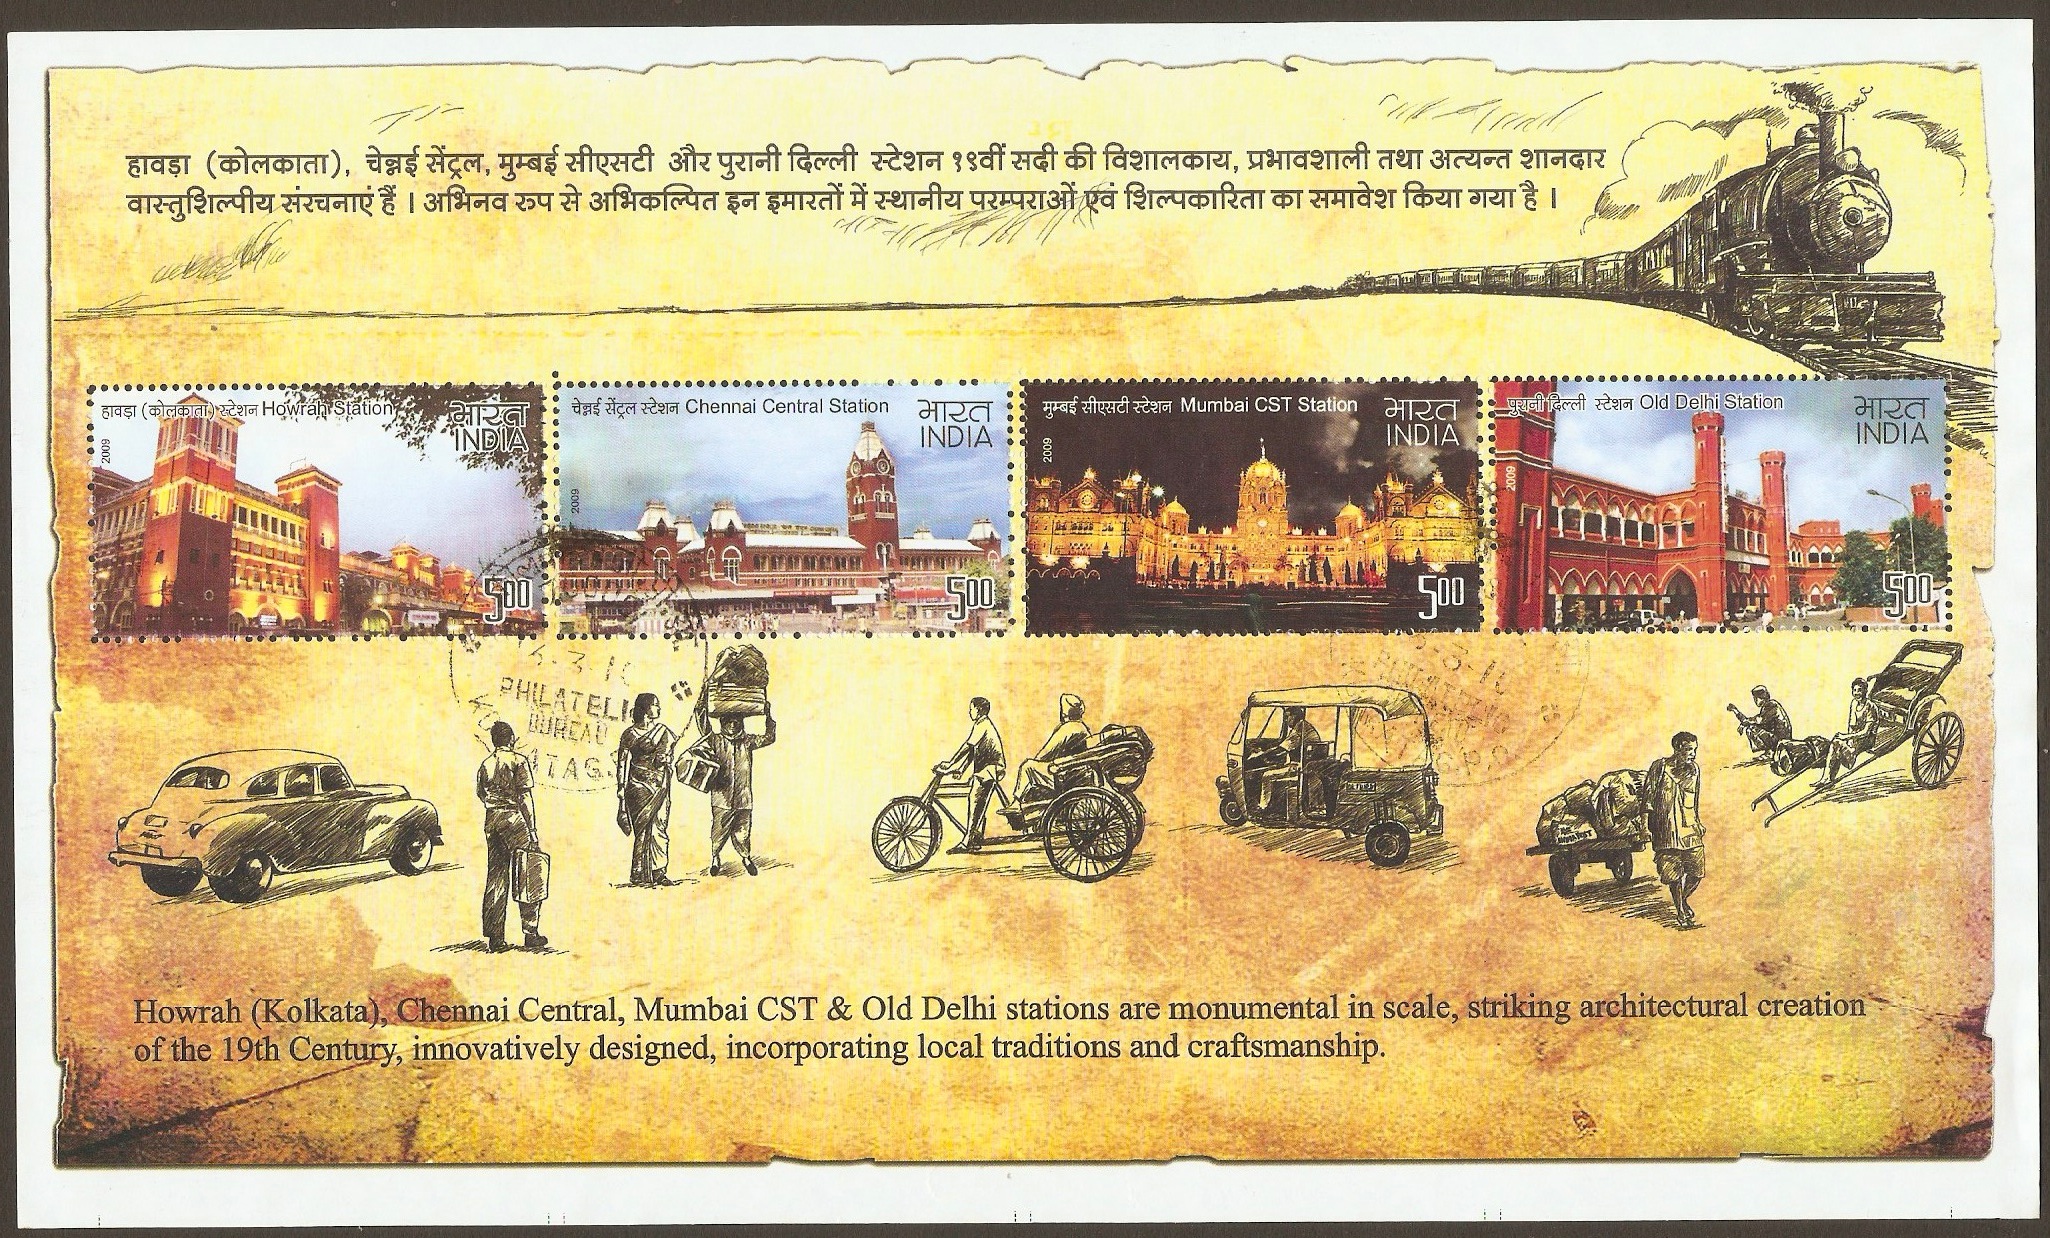 India 2009 Heritage Railway Stations Sheet. SGMS2621.